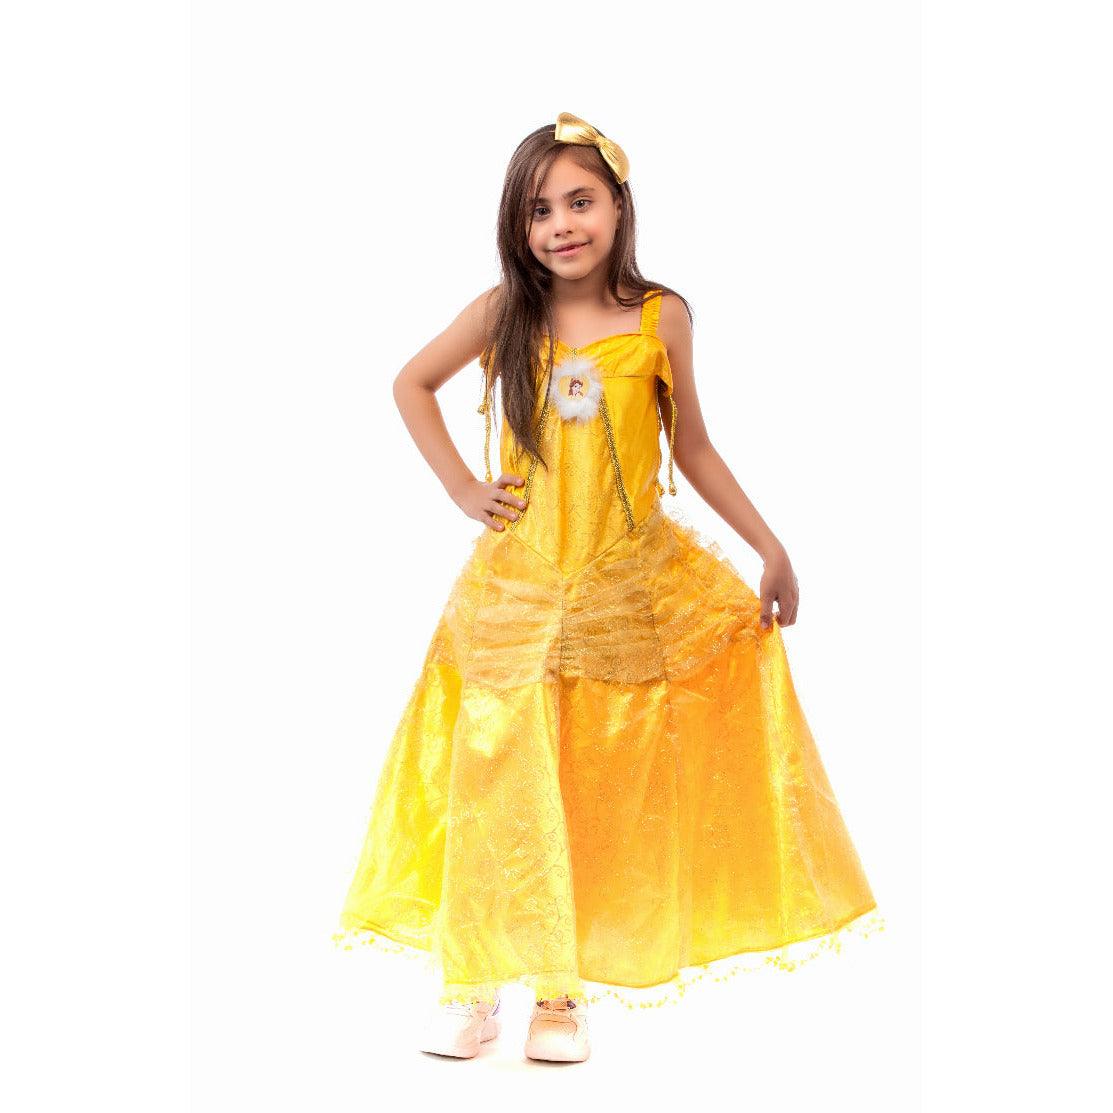 Belle Costume (Beauty And The Beast) - Ourkids - M&A